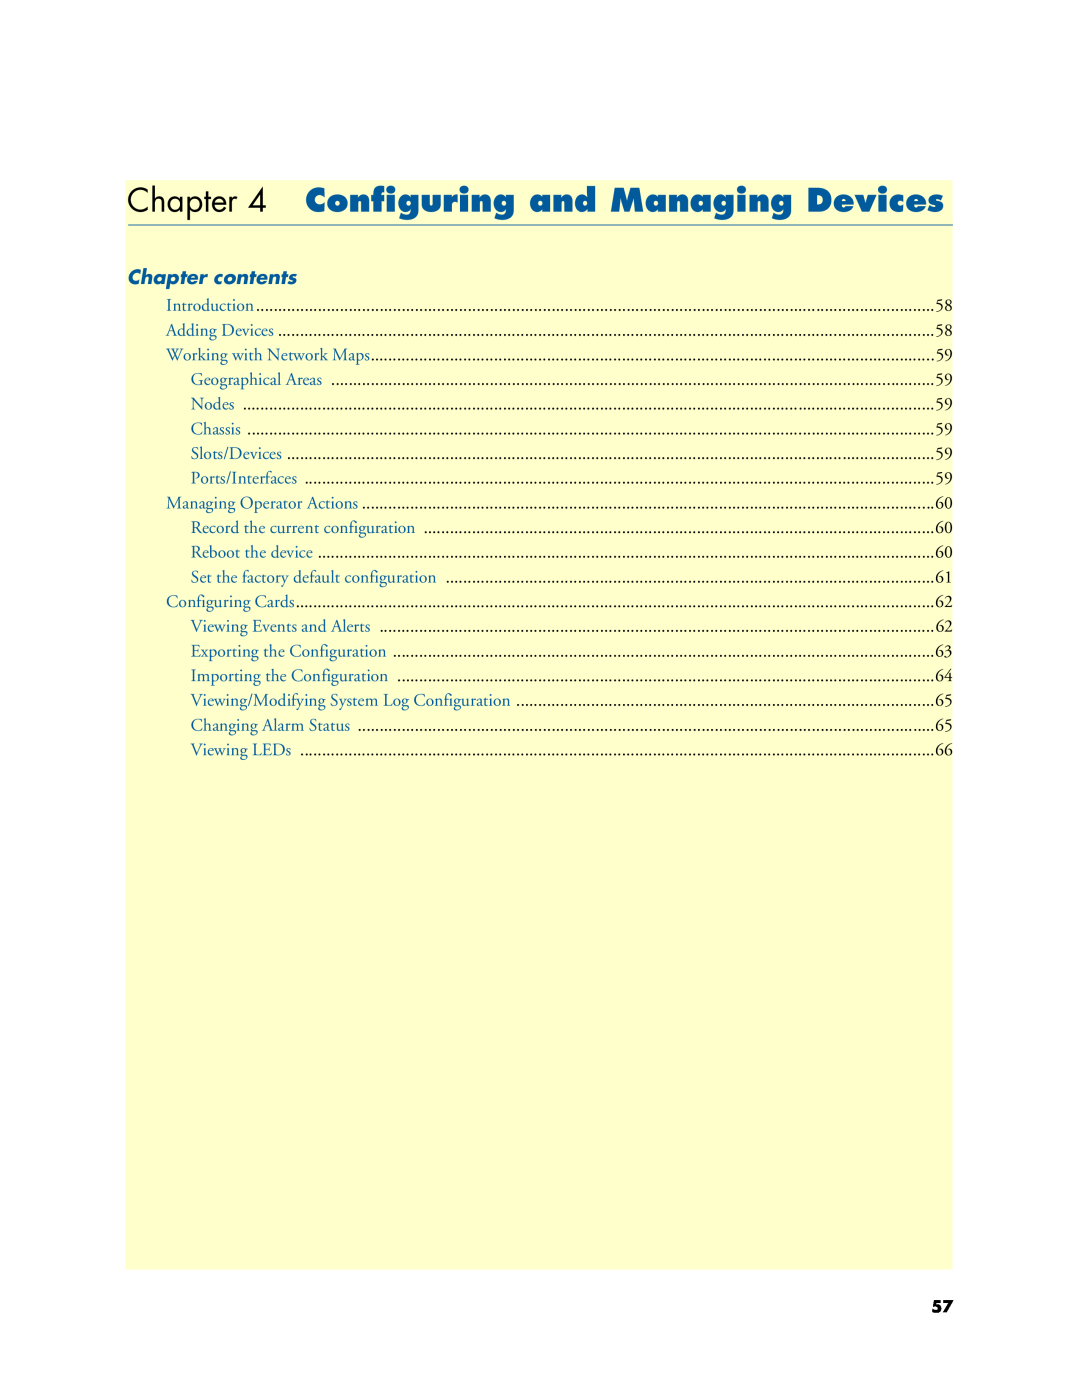 Patton electronic 6300 user manual Configuring and Managing Devices, Chapter contents 